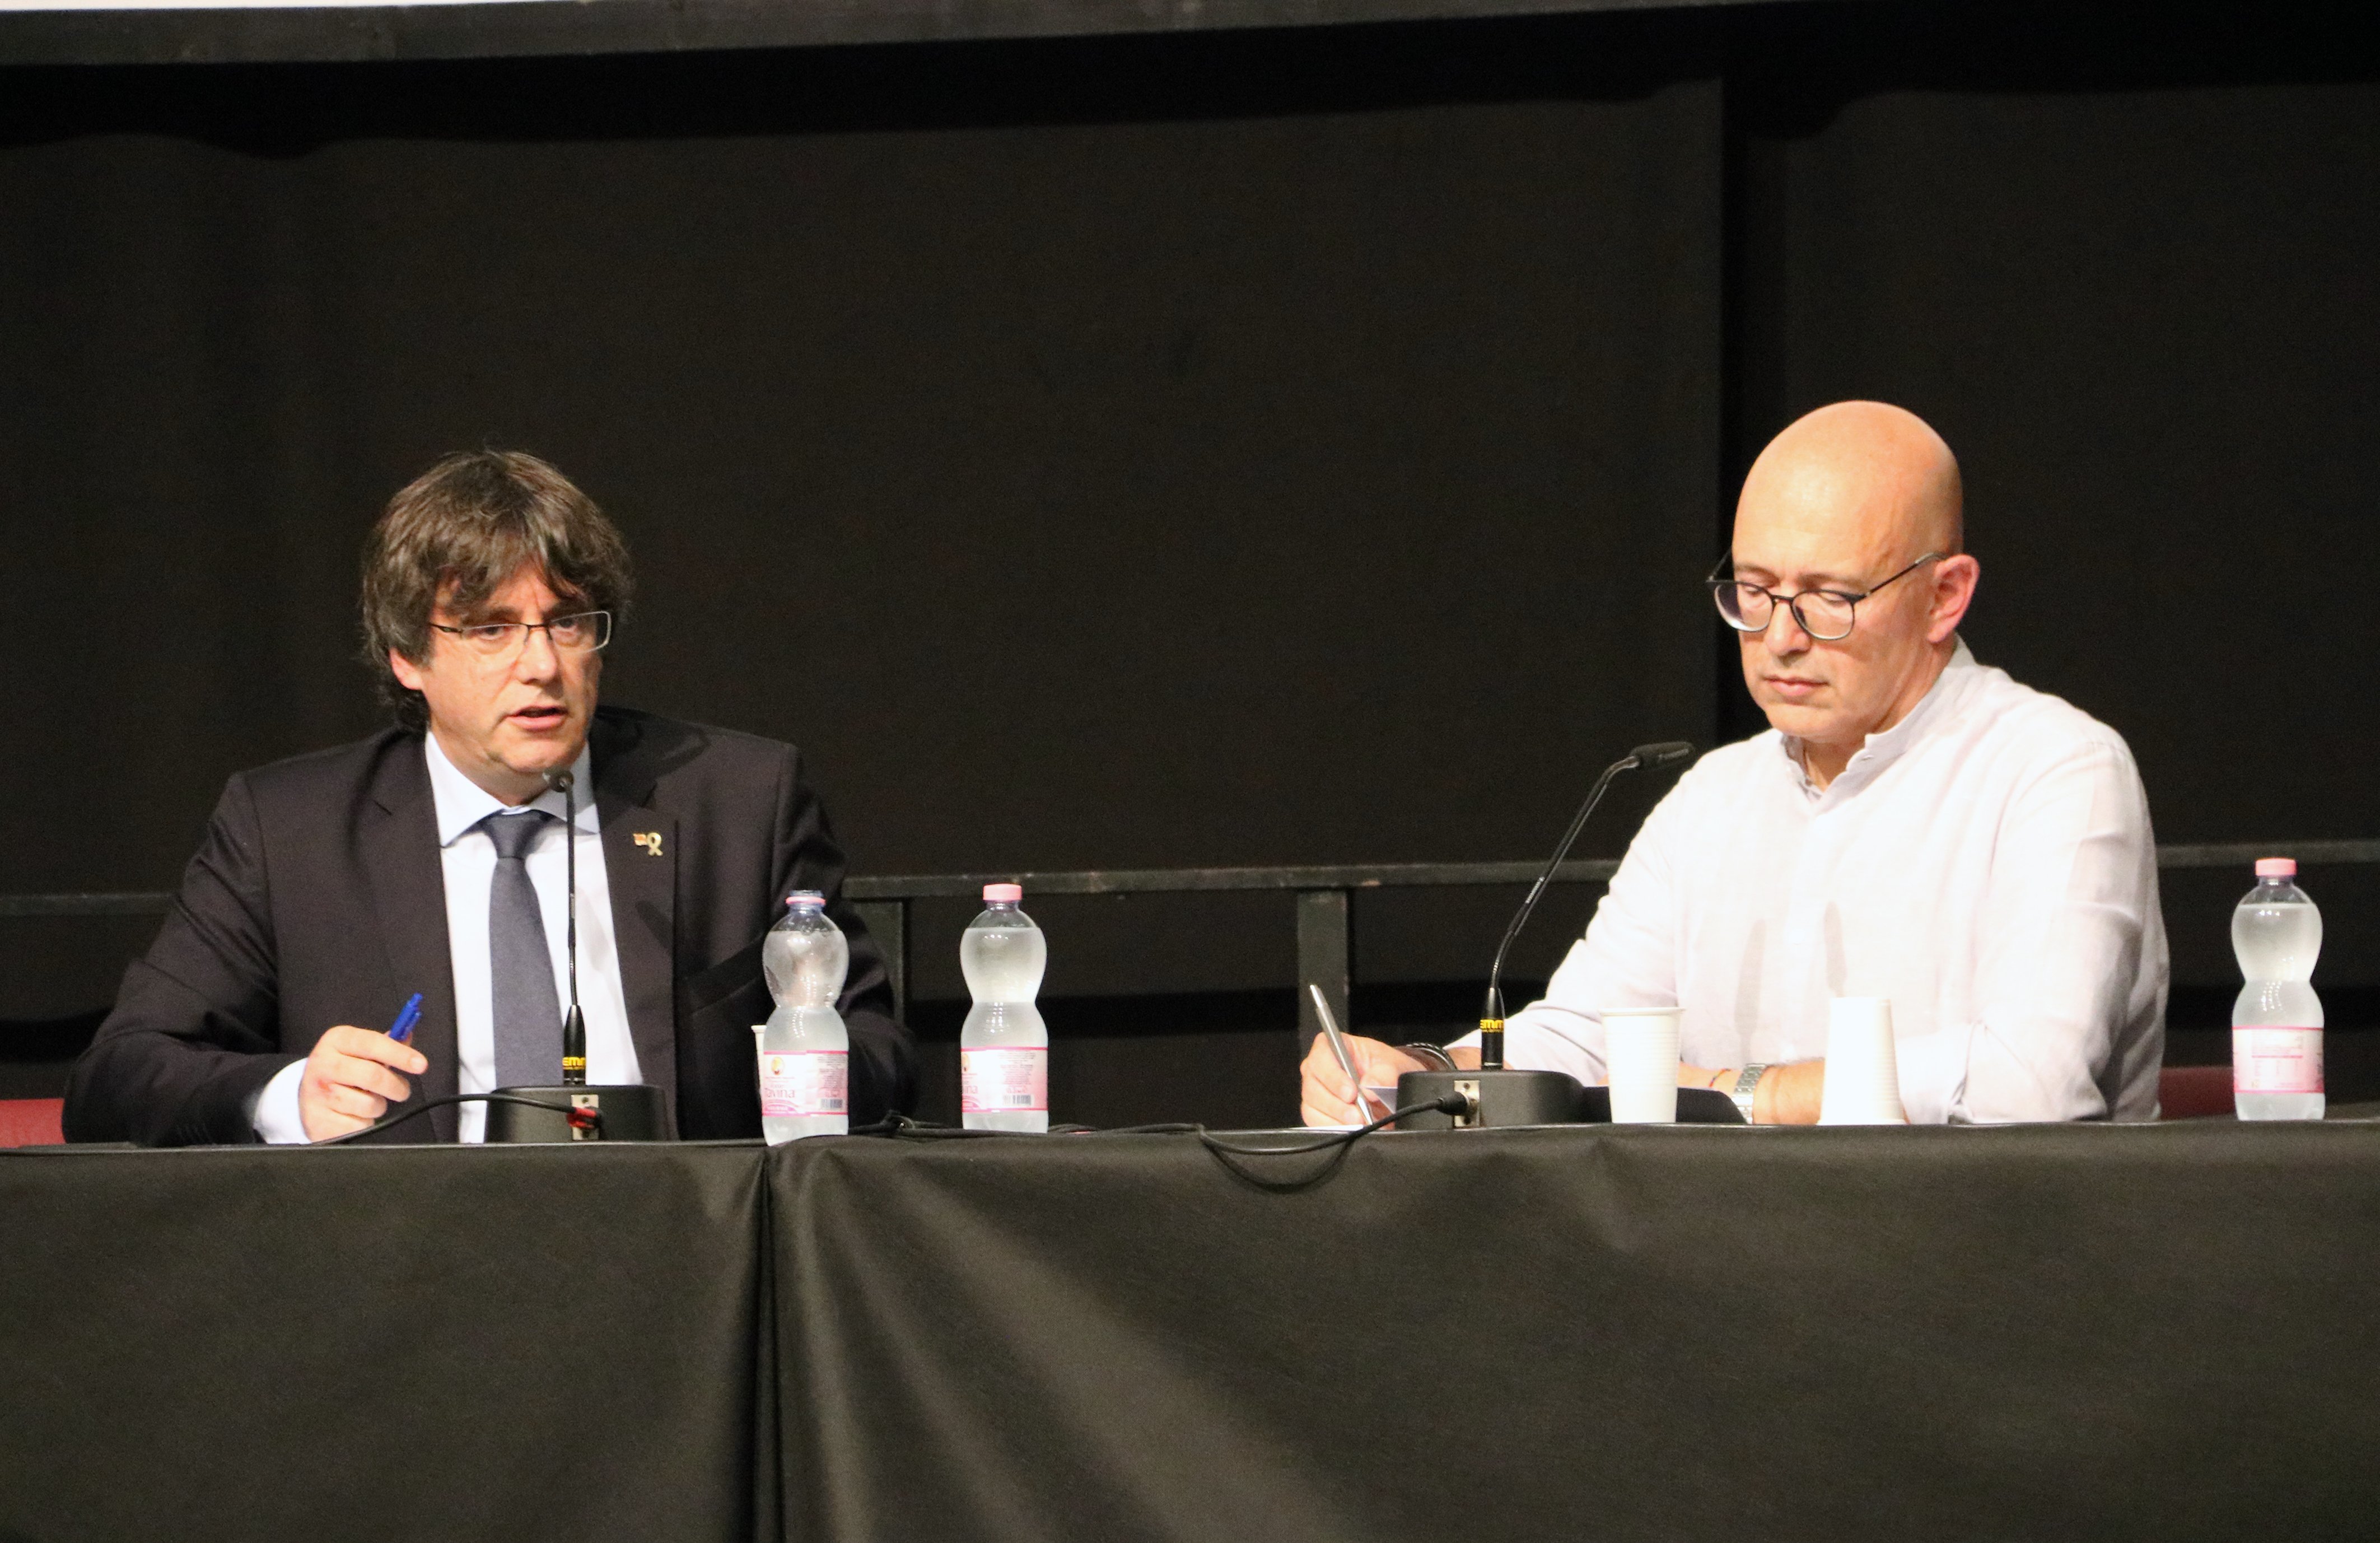 Puigdemont: "Negotiating with Spain must not paralyse independence"